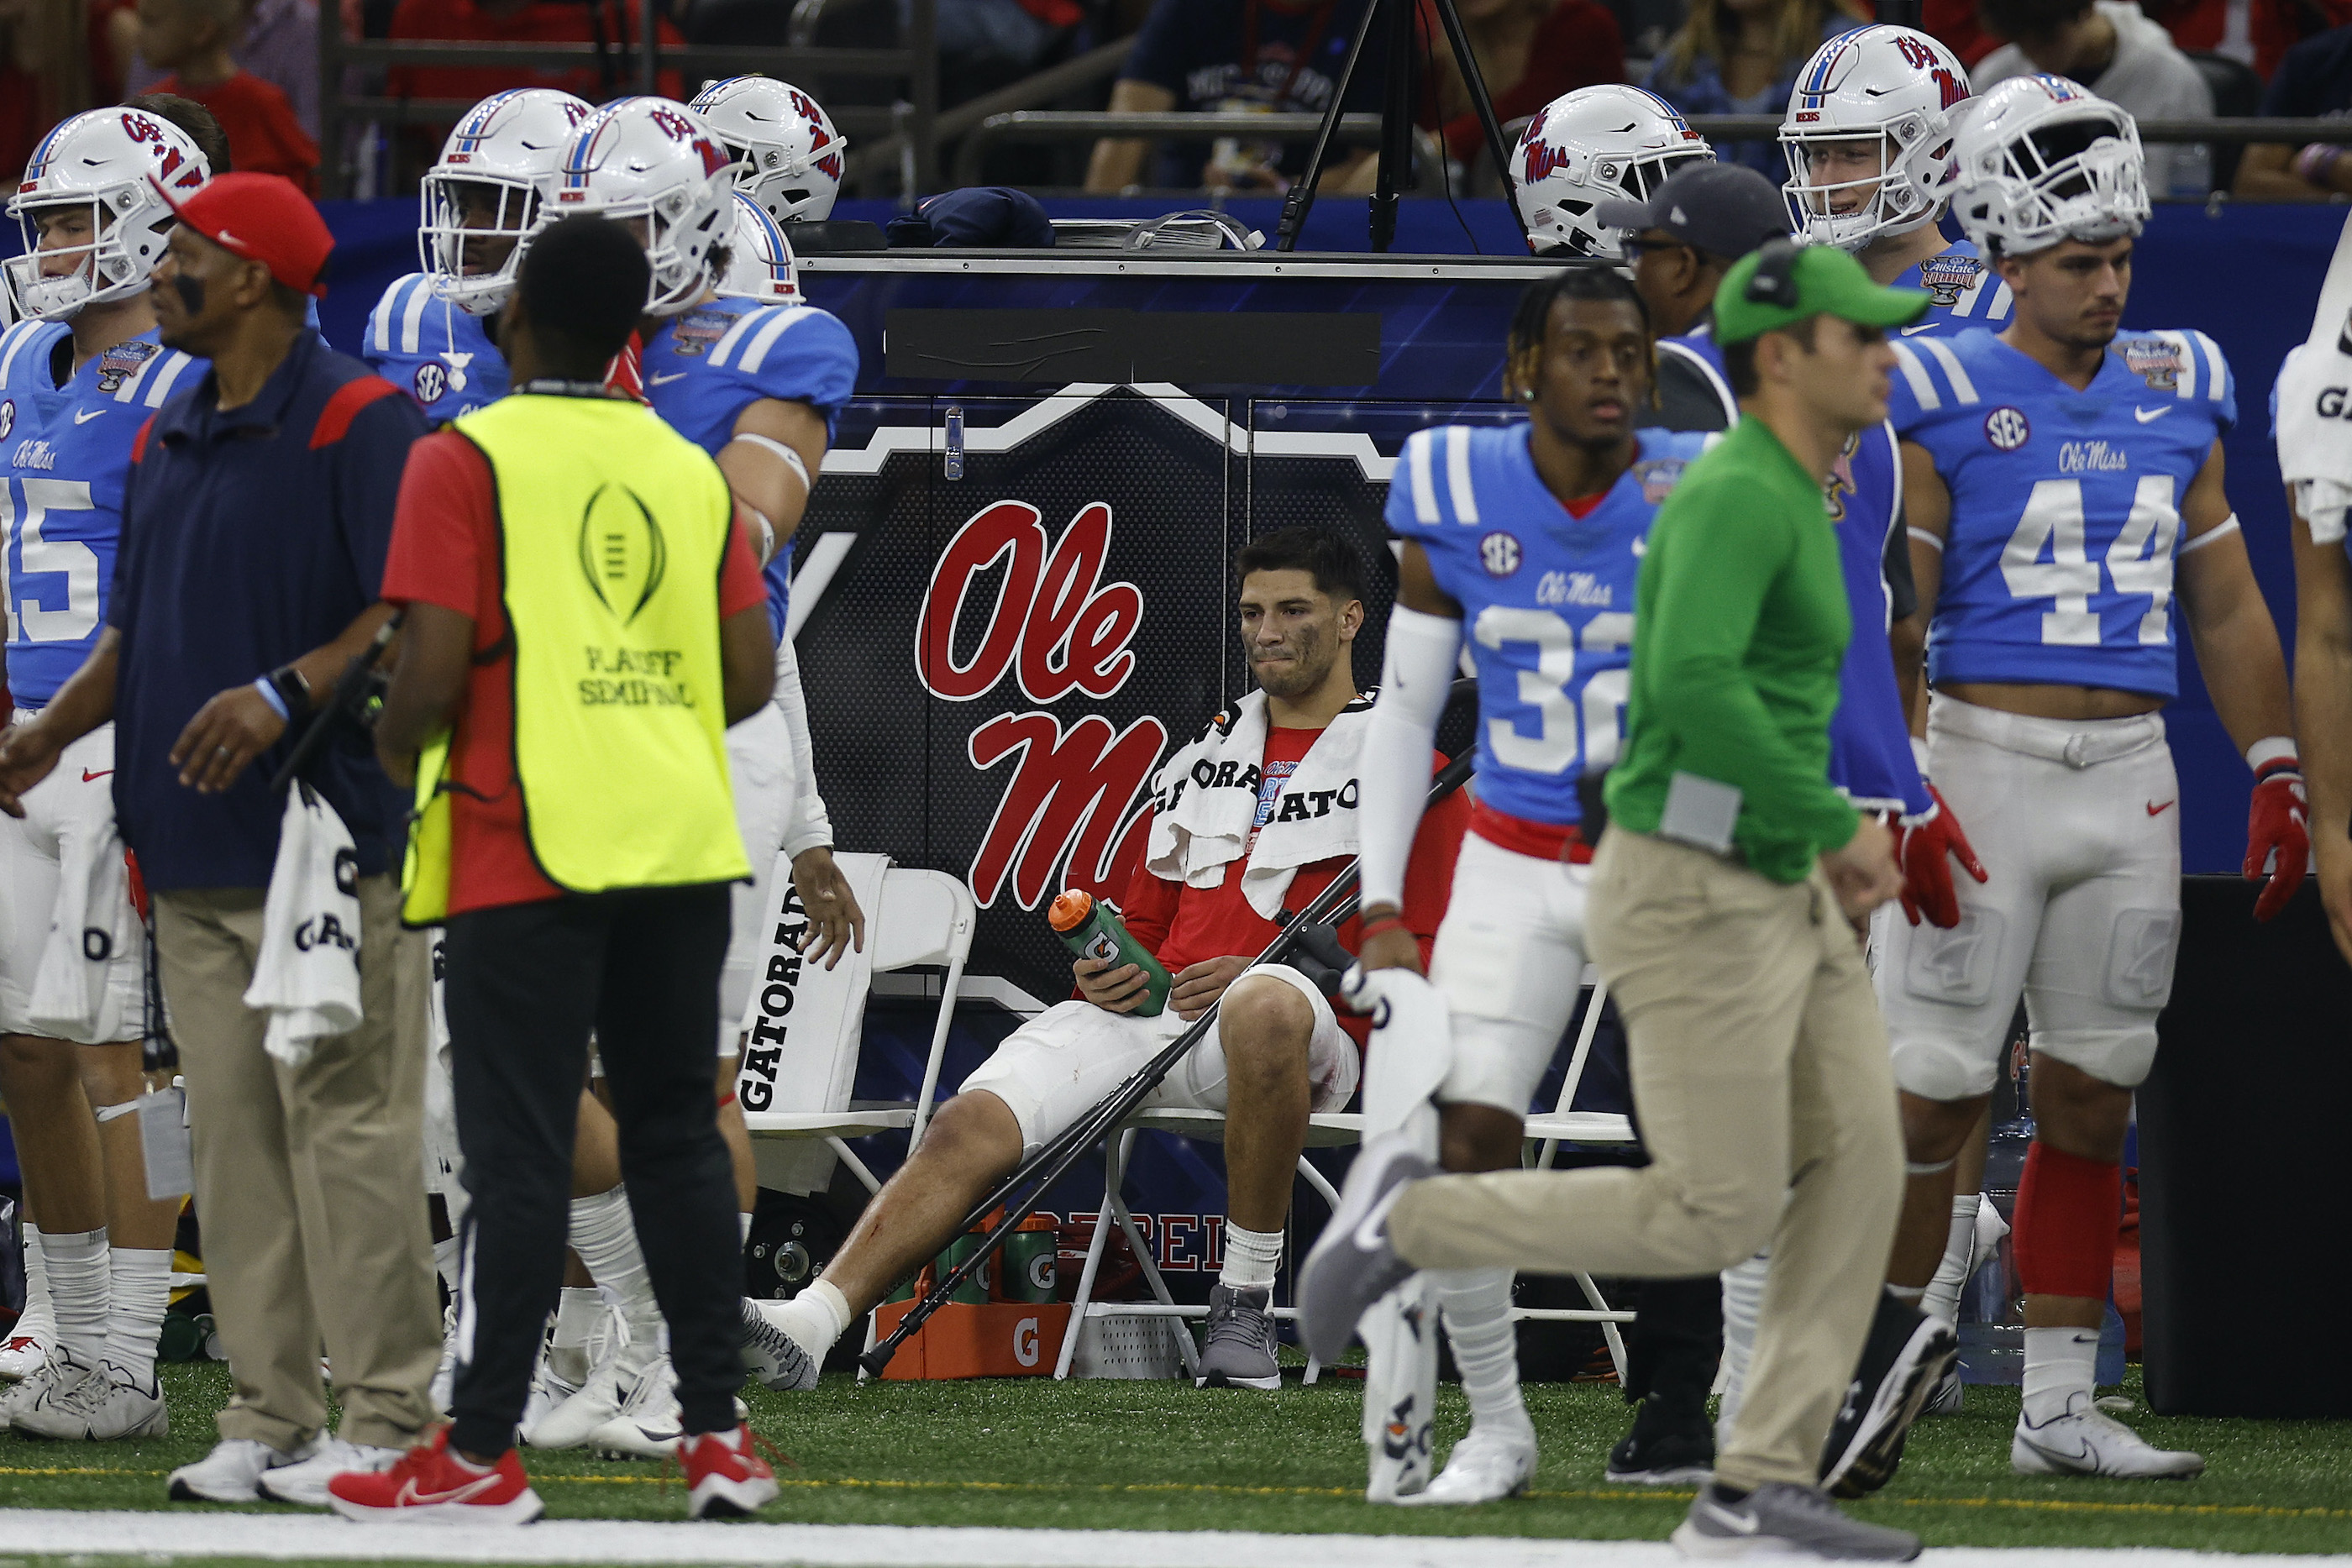 Matt Corral #2 of the Mississippi Rebels looks on from the sideline after he was injured during the first quarter against the Baylor Bears in the Allstate Sugar Bowl at Caesars Superdome on January 01, 2022 in New Orleans, Louisiana.